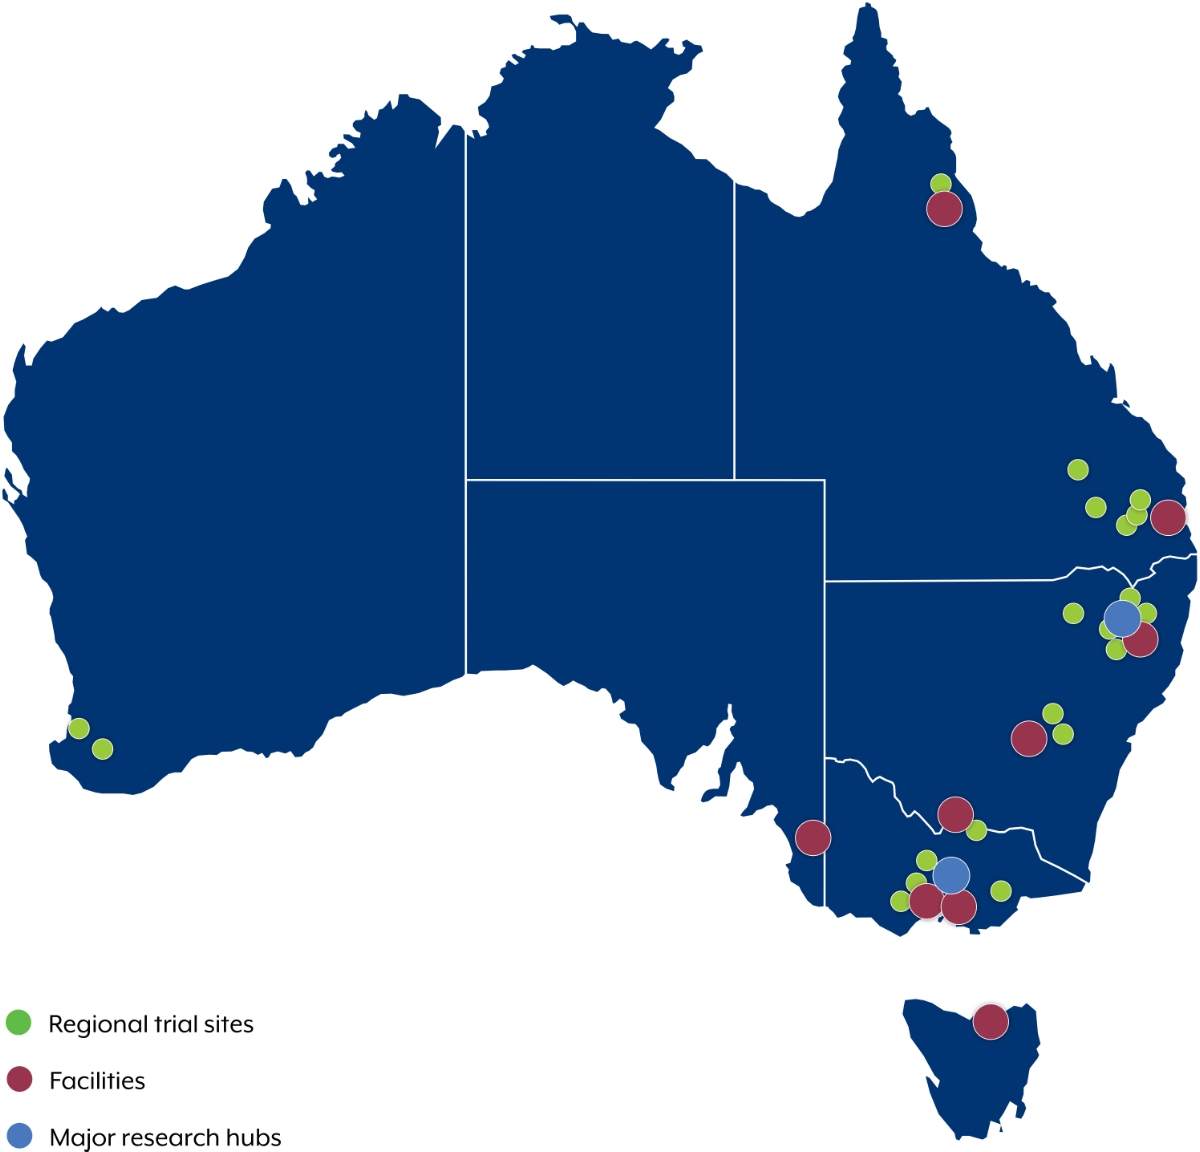 Map of Australia showing PGG Wrightson Seeds regional trial sites, facilities and major research hubs in Queensland, NSW, Victoria, Tasmania, South Australia and Western Australia.